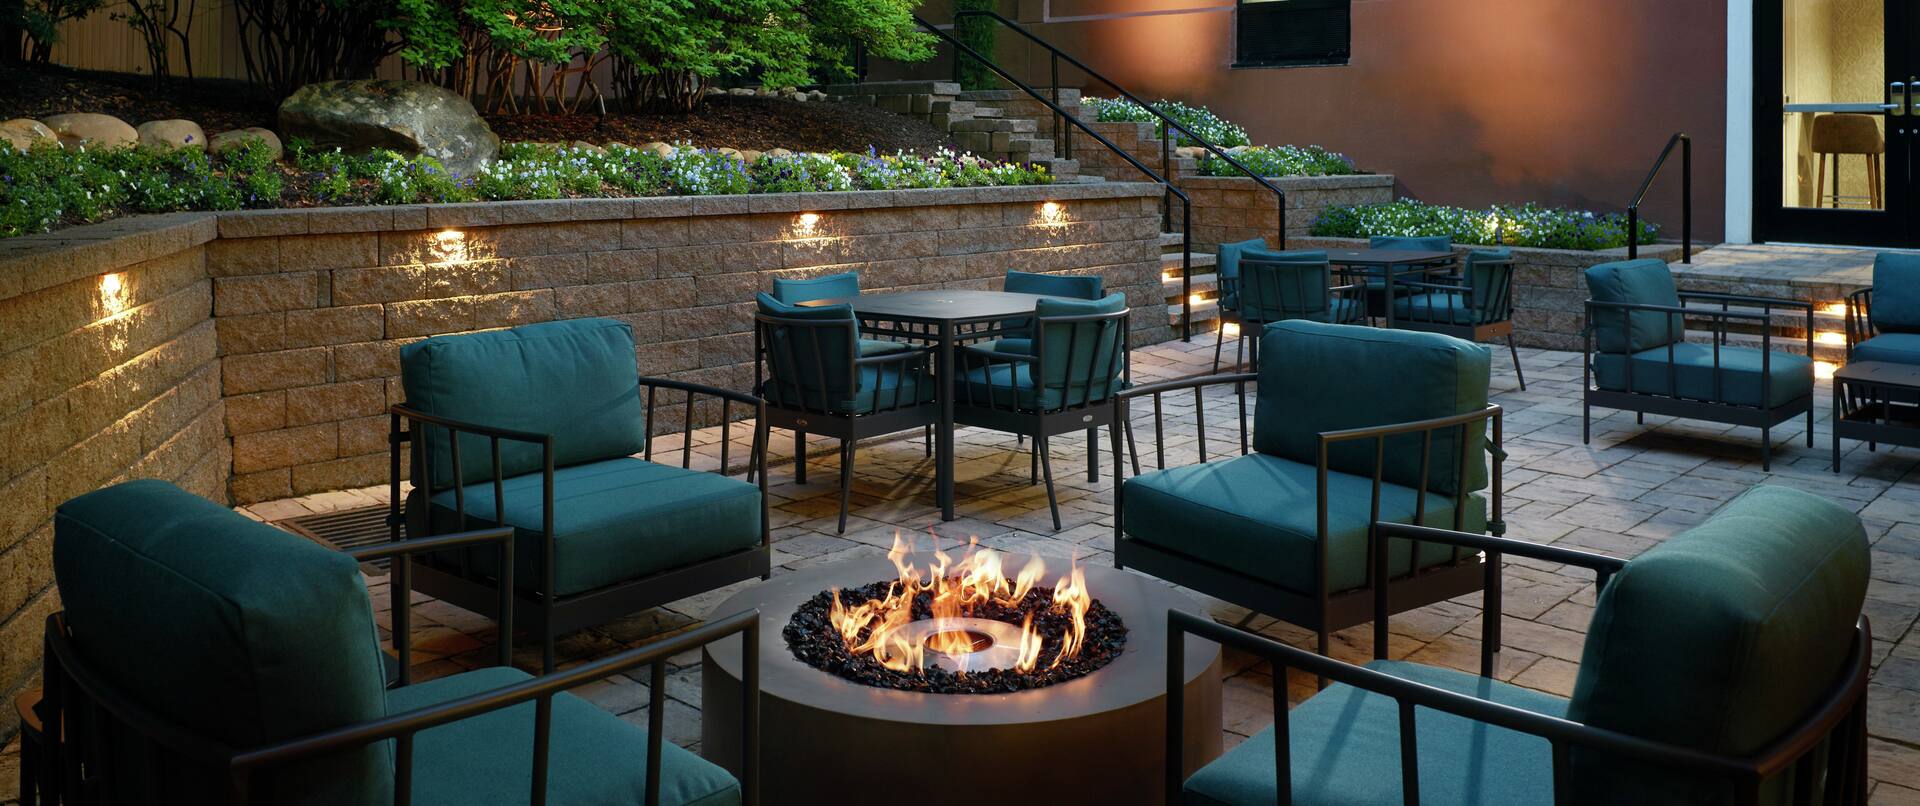 Fire pit on Patio